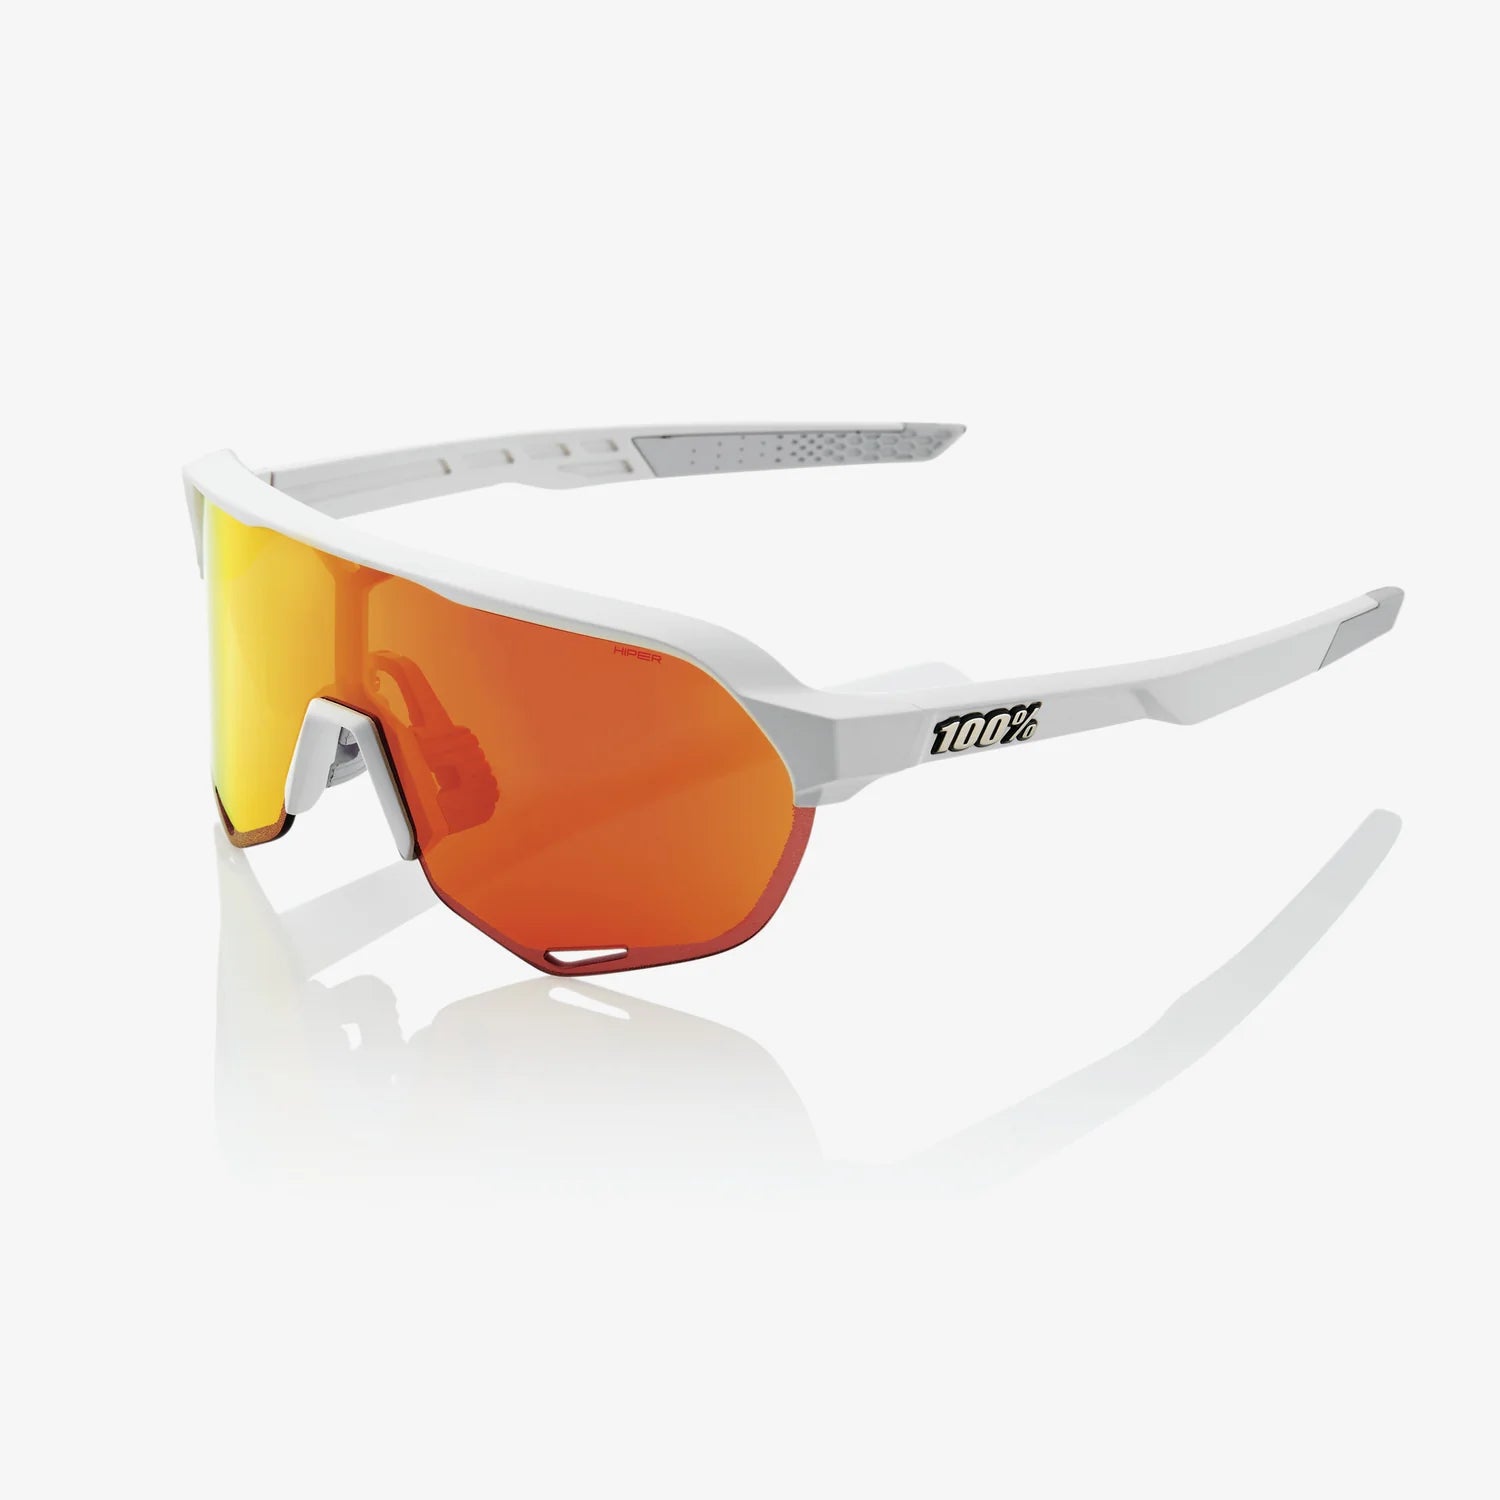 100 Percent Sunglasses - S2 - Soft Tact Off White - HiPER® Red Multilayer Mirror Lens